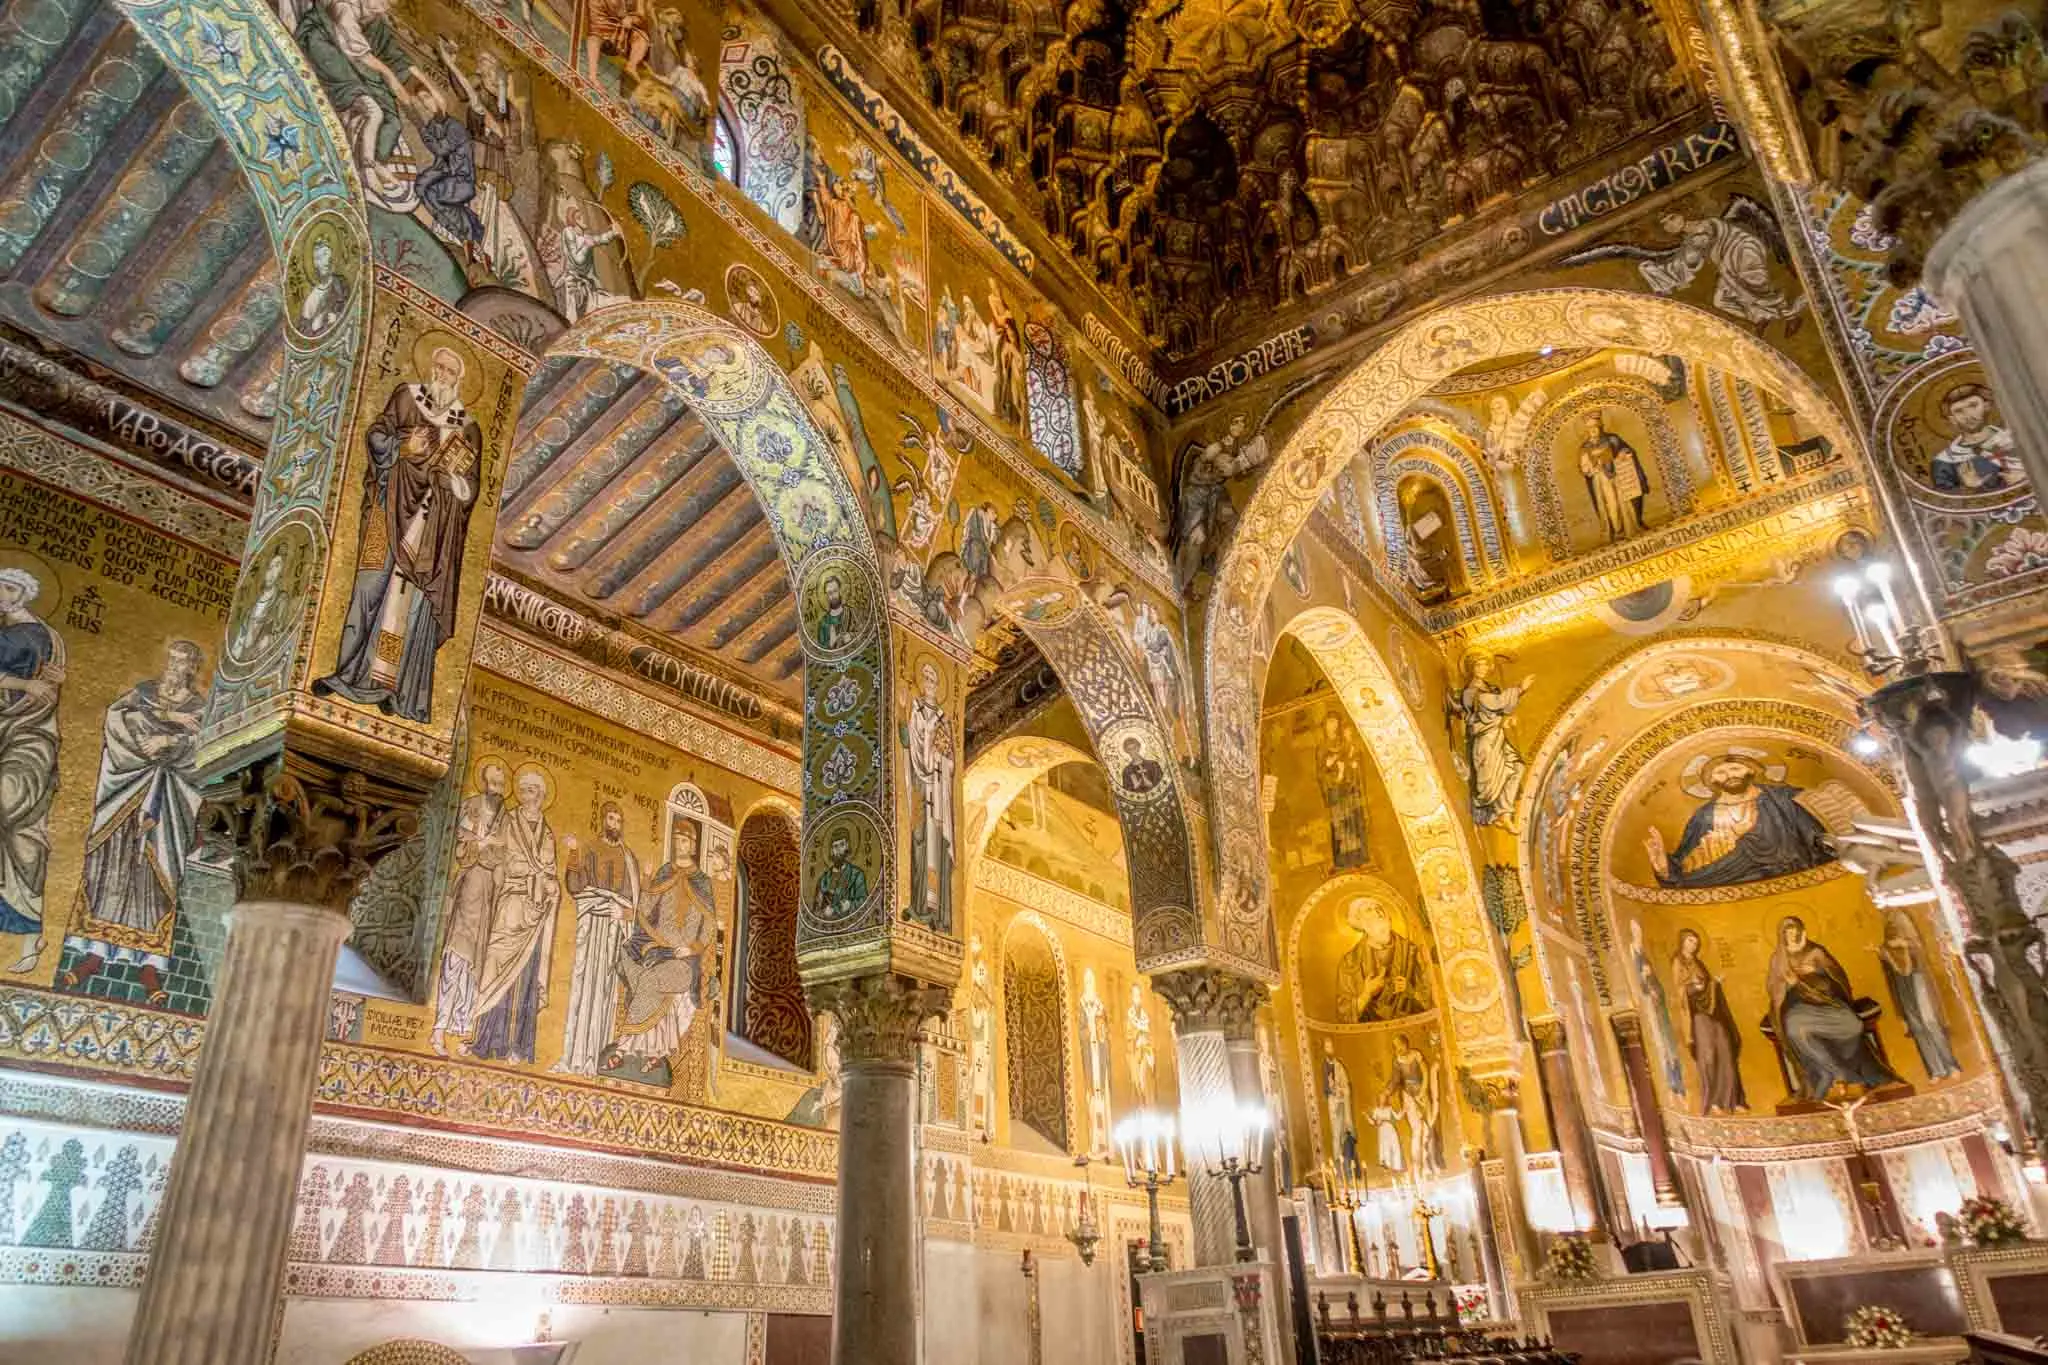 Interior of chapel covered in gold and tiled mosaics